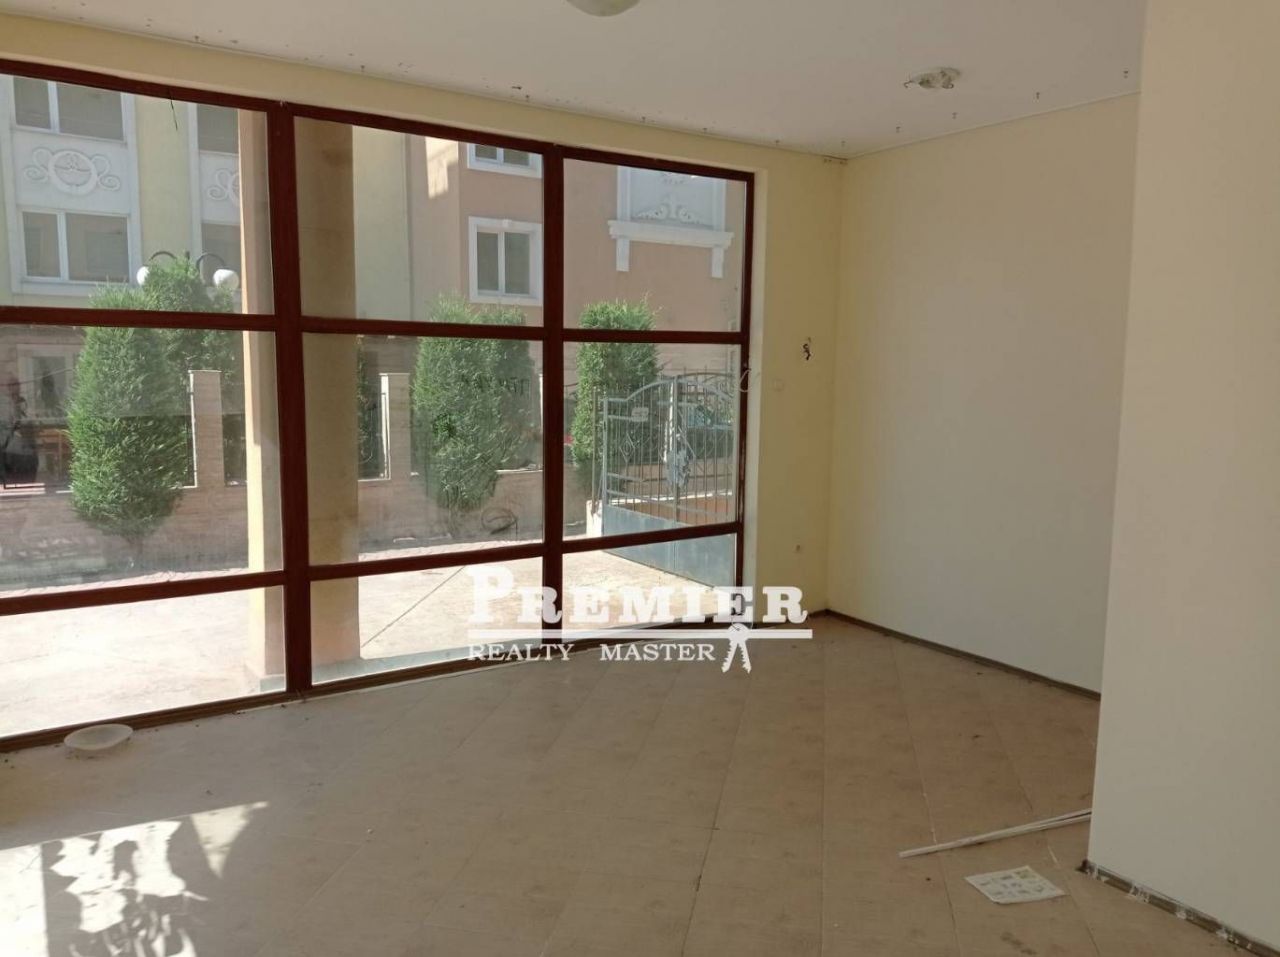 Commercial property at Sunny Beach, Bulgaria, 51.09 sq.m - picture 1